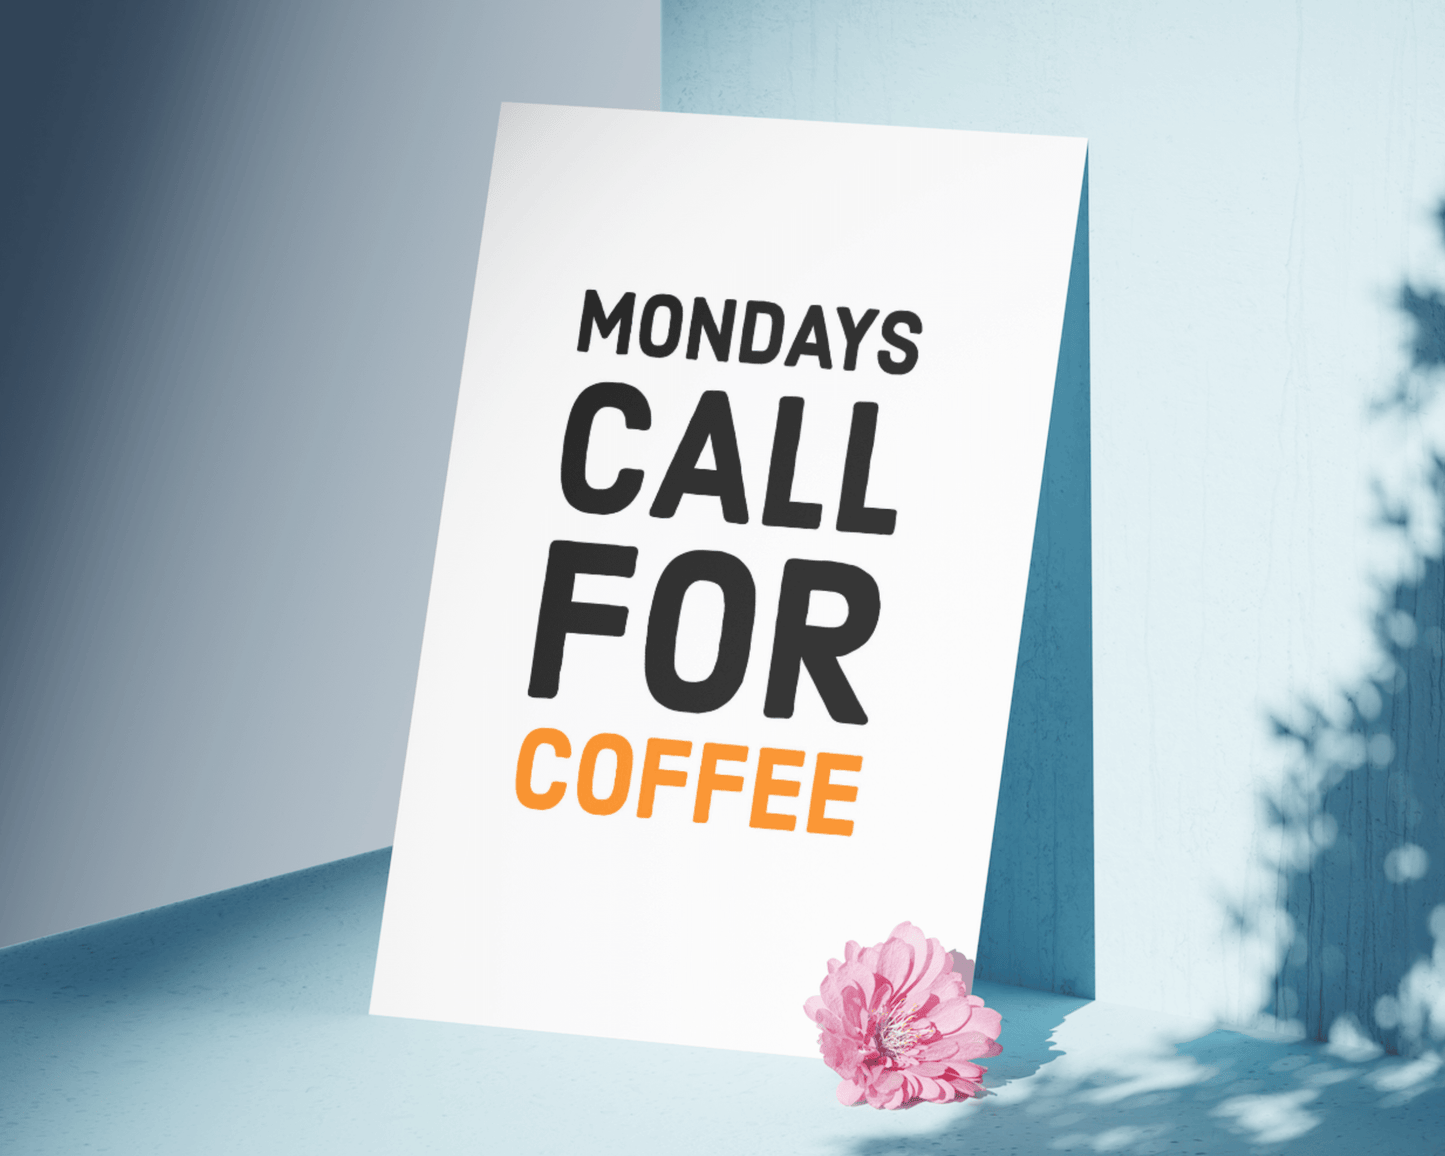 Mondays Call For Coffee Funny Office Wall Print Prints Moments That Unite